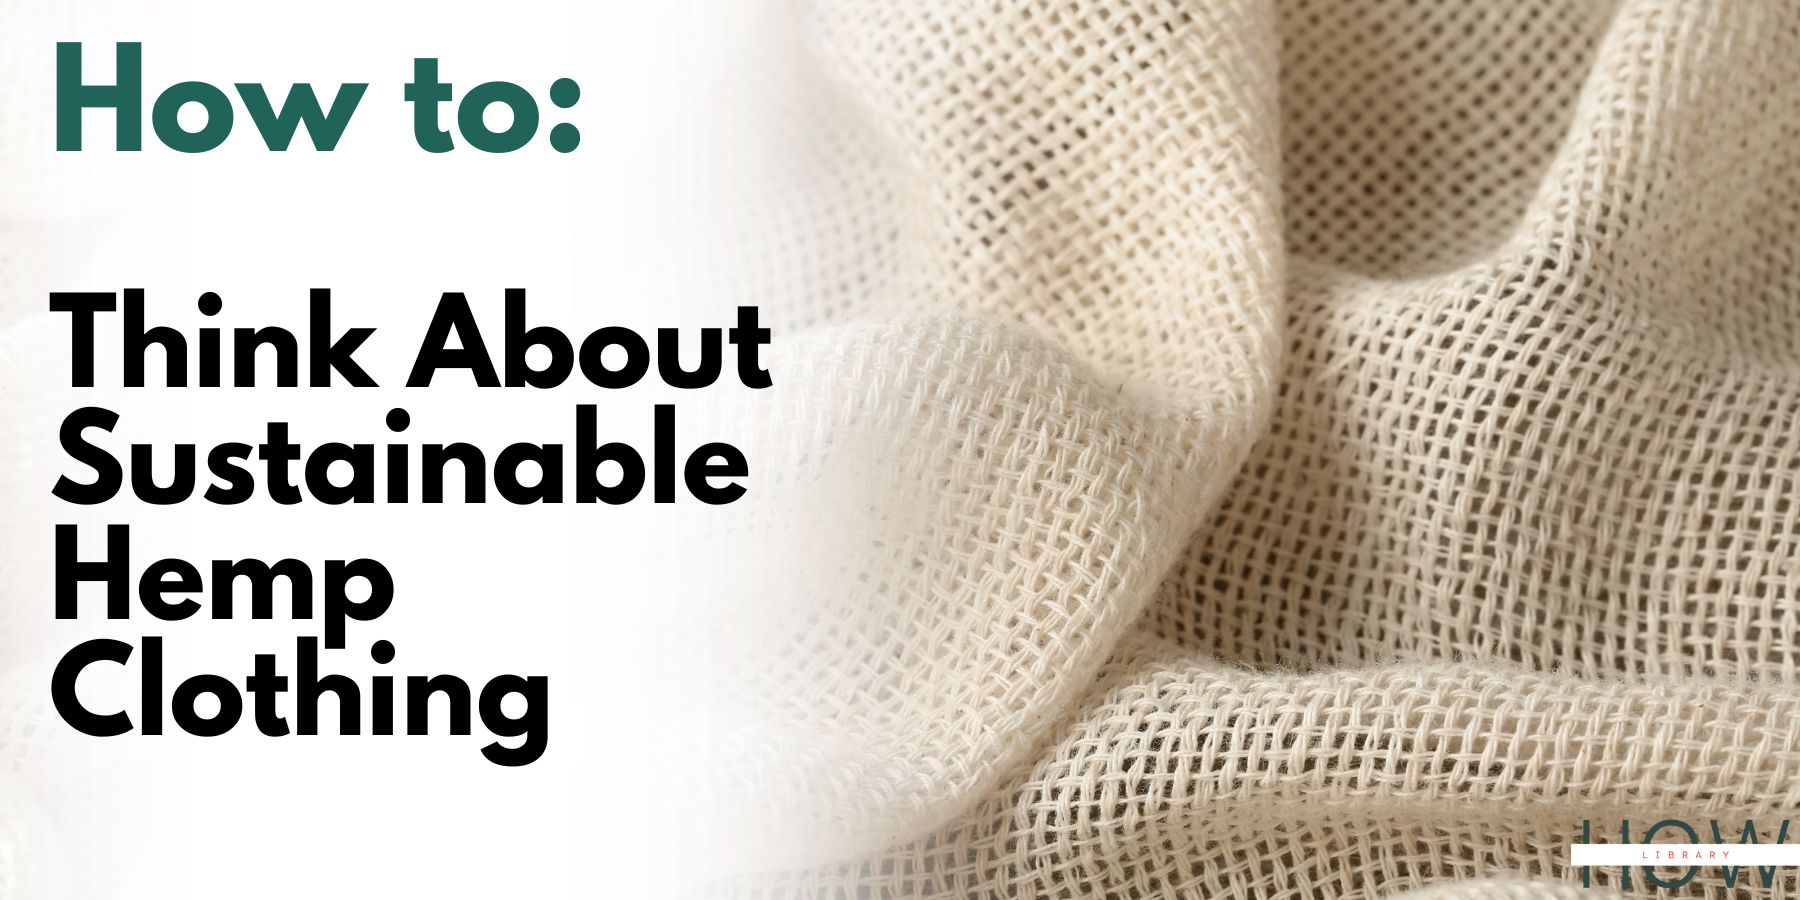 How To Think About Sustainable Hemp Clothing